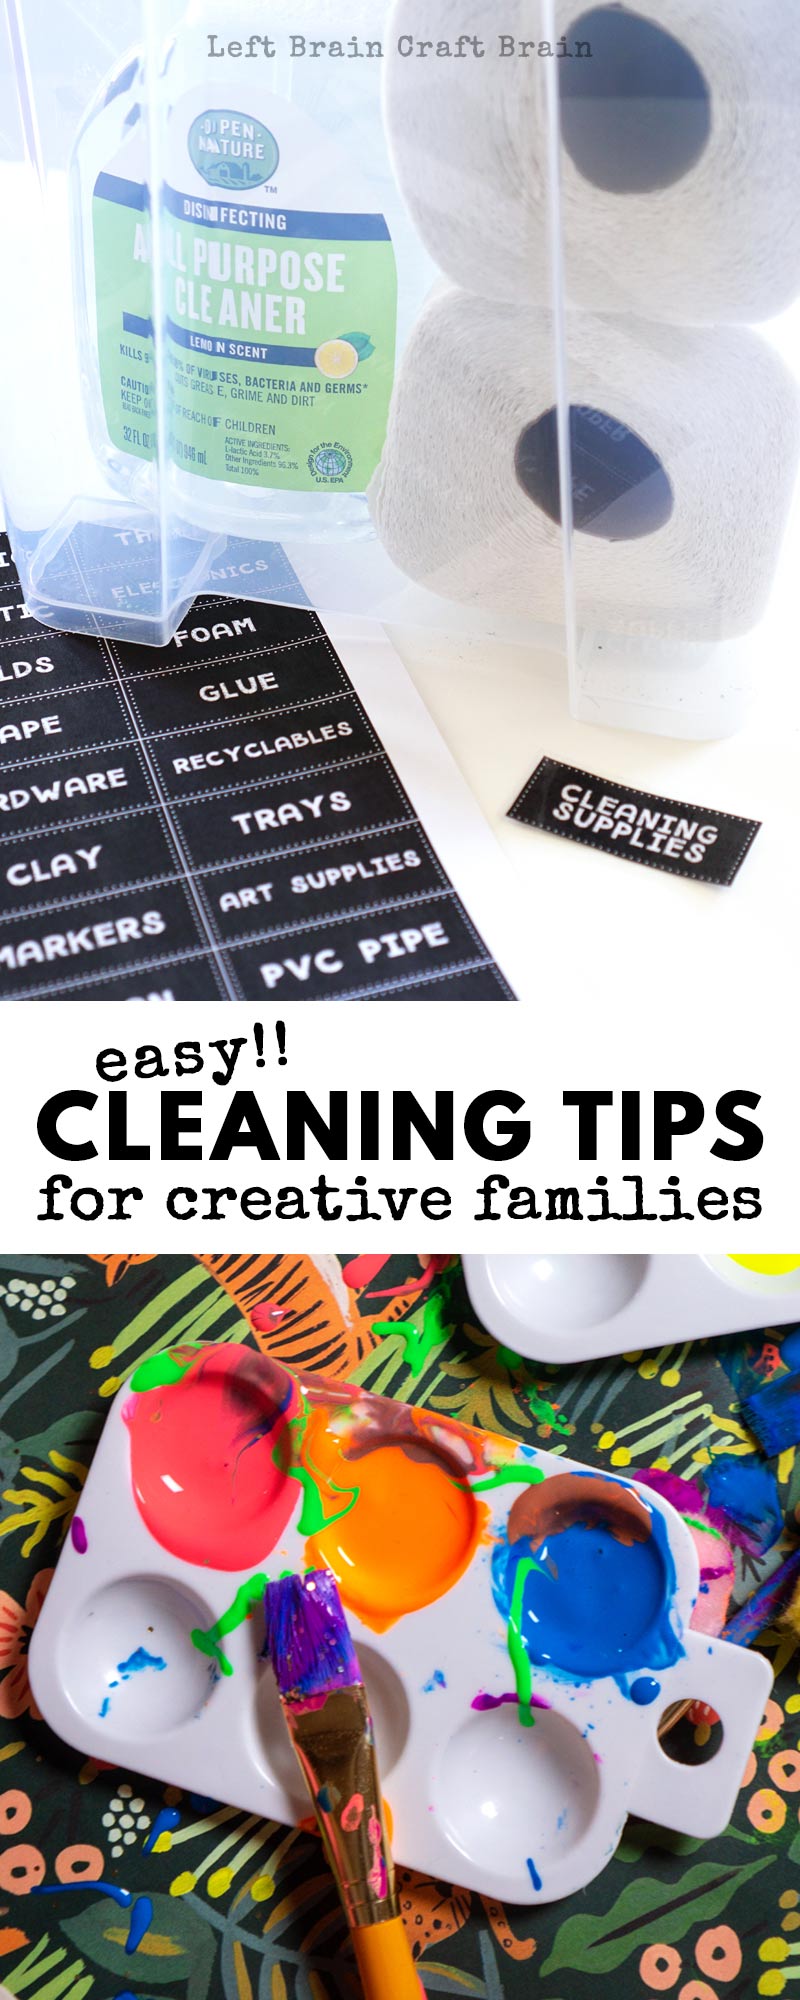 If you have a creative family, your house may be filled with supplies and projects. Try these simple cleaning tips for creative families to keep your house in order without sacrificing the fun.